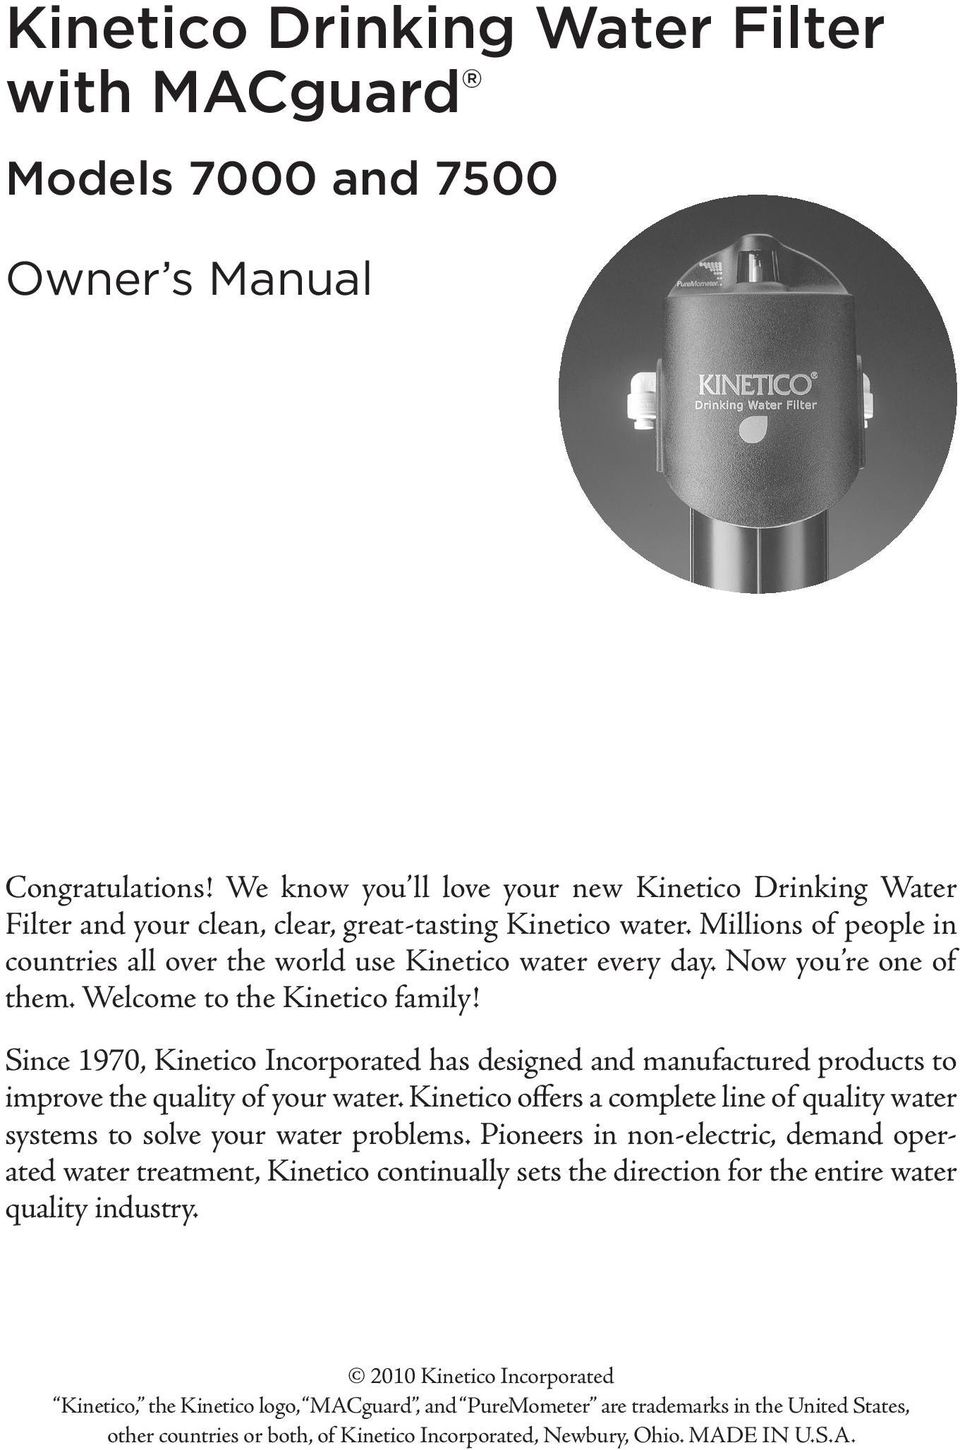 Now you re one of them. Welcome to the Kinetico family! Since 1970, Kinetico Incorporated has designed and manufactured products to improve the quality of your water.